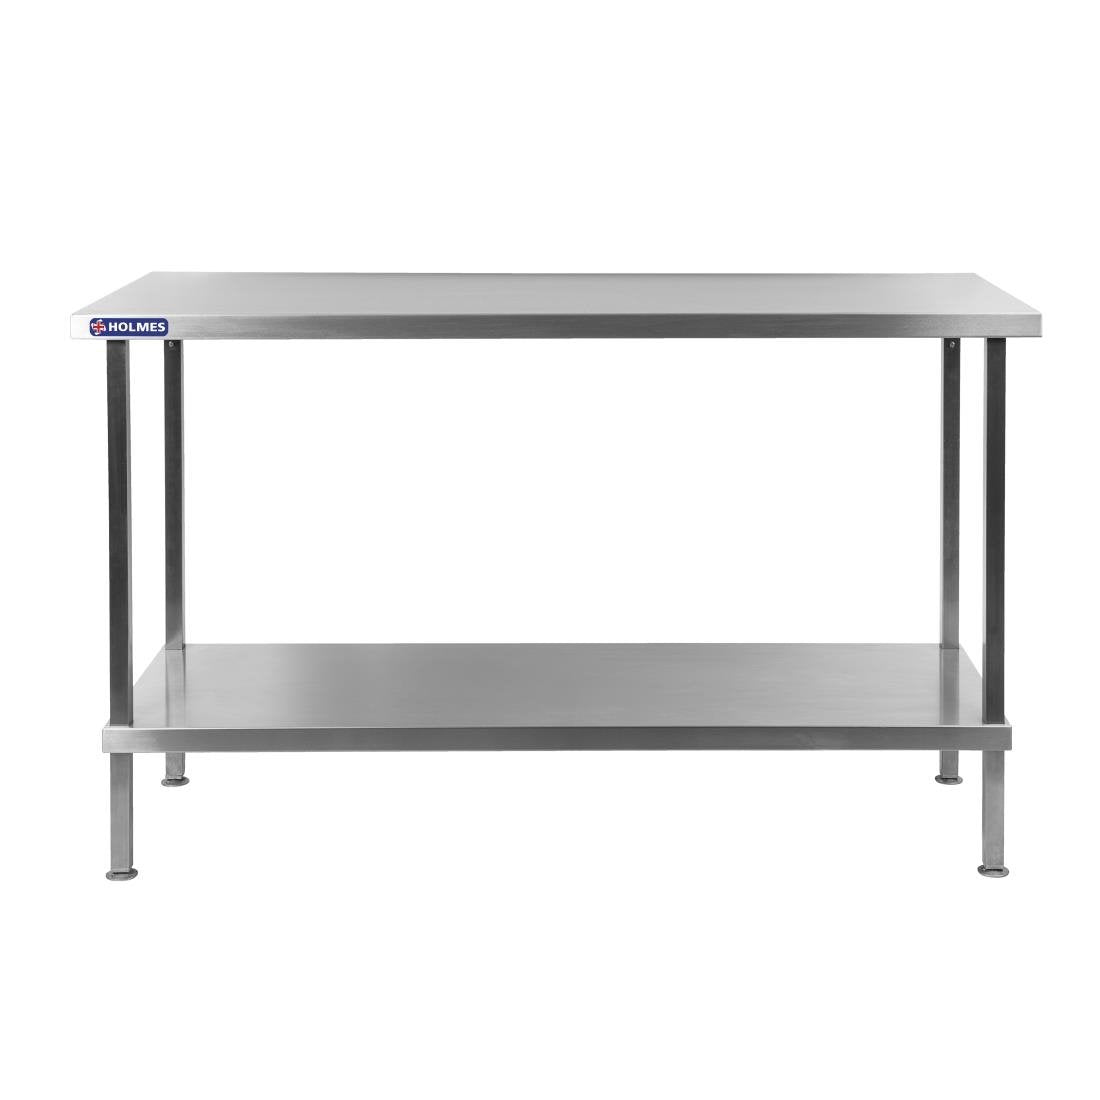 DR058 Holmes Stainless Steel Centre Table 1800mm JD Catering Equipment Solutions Ltd